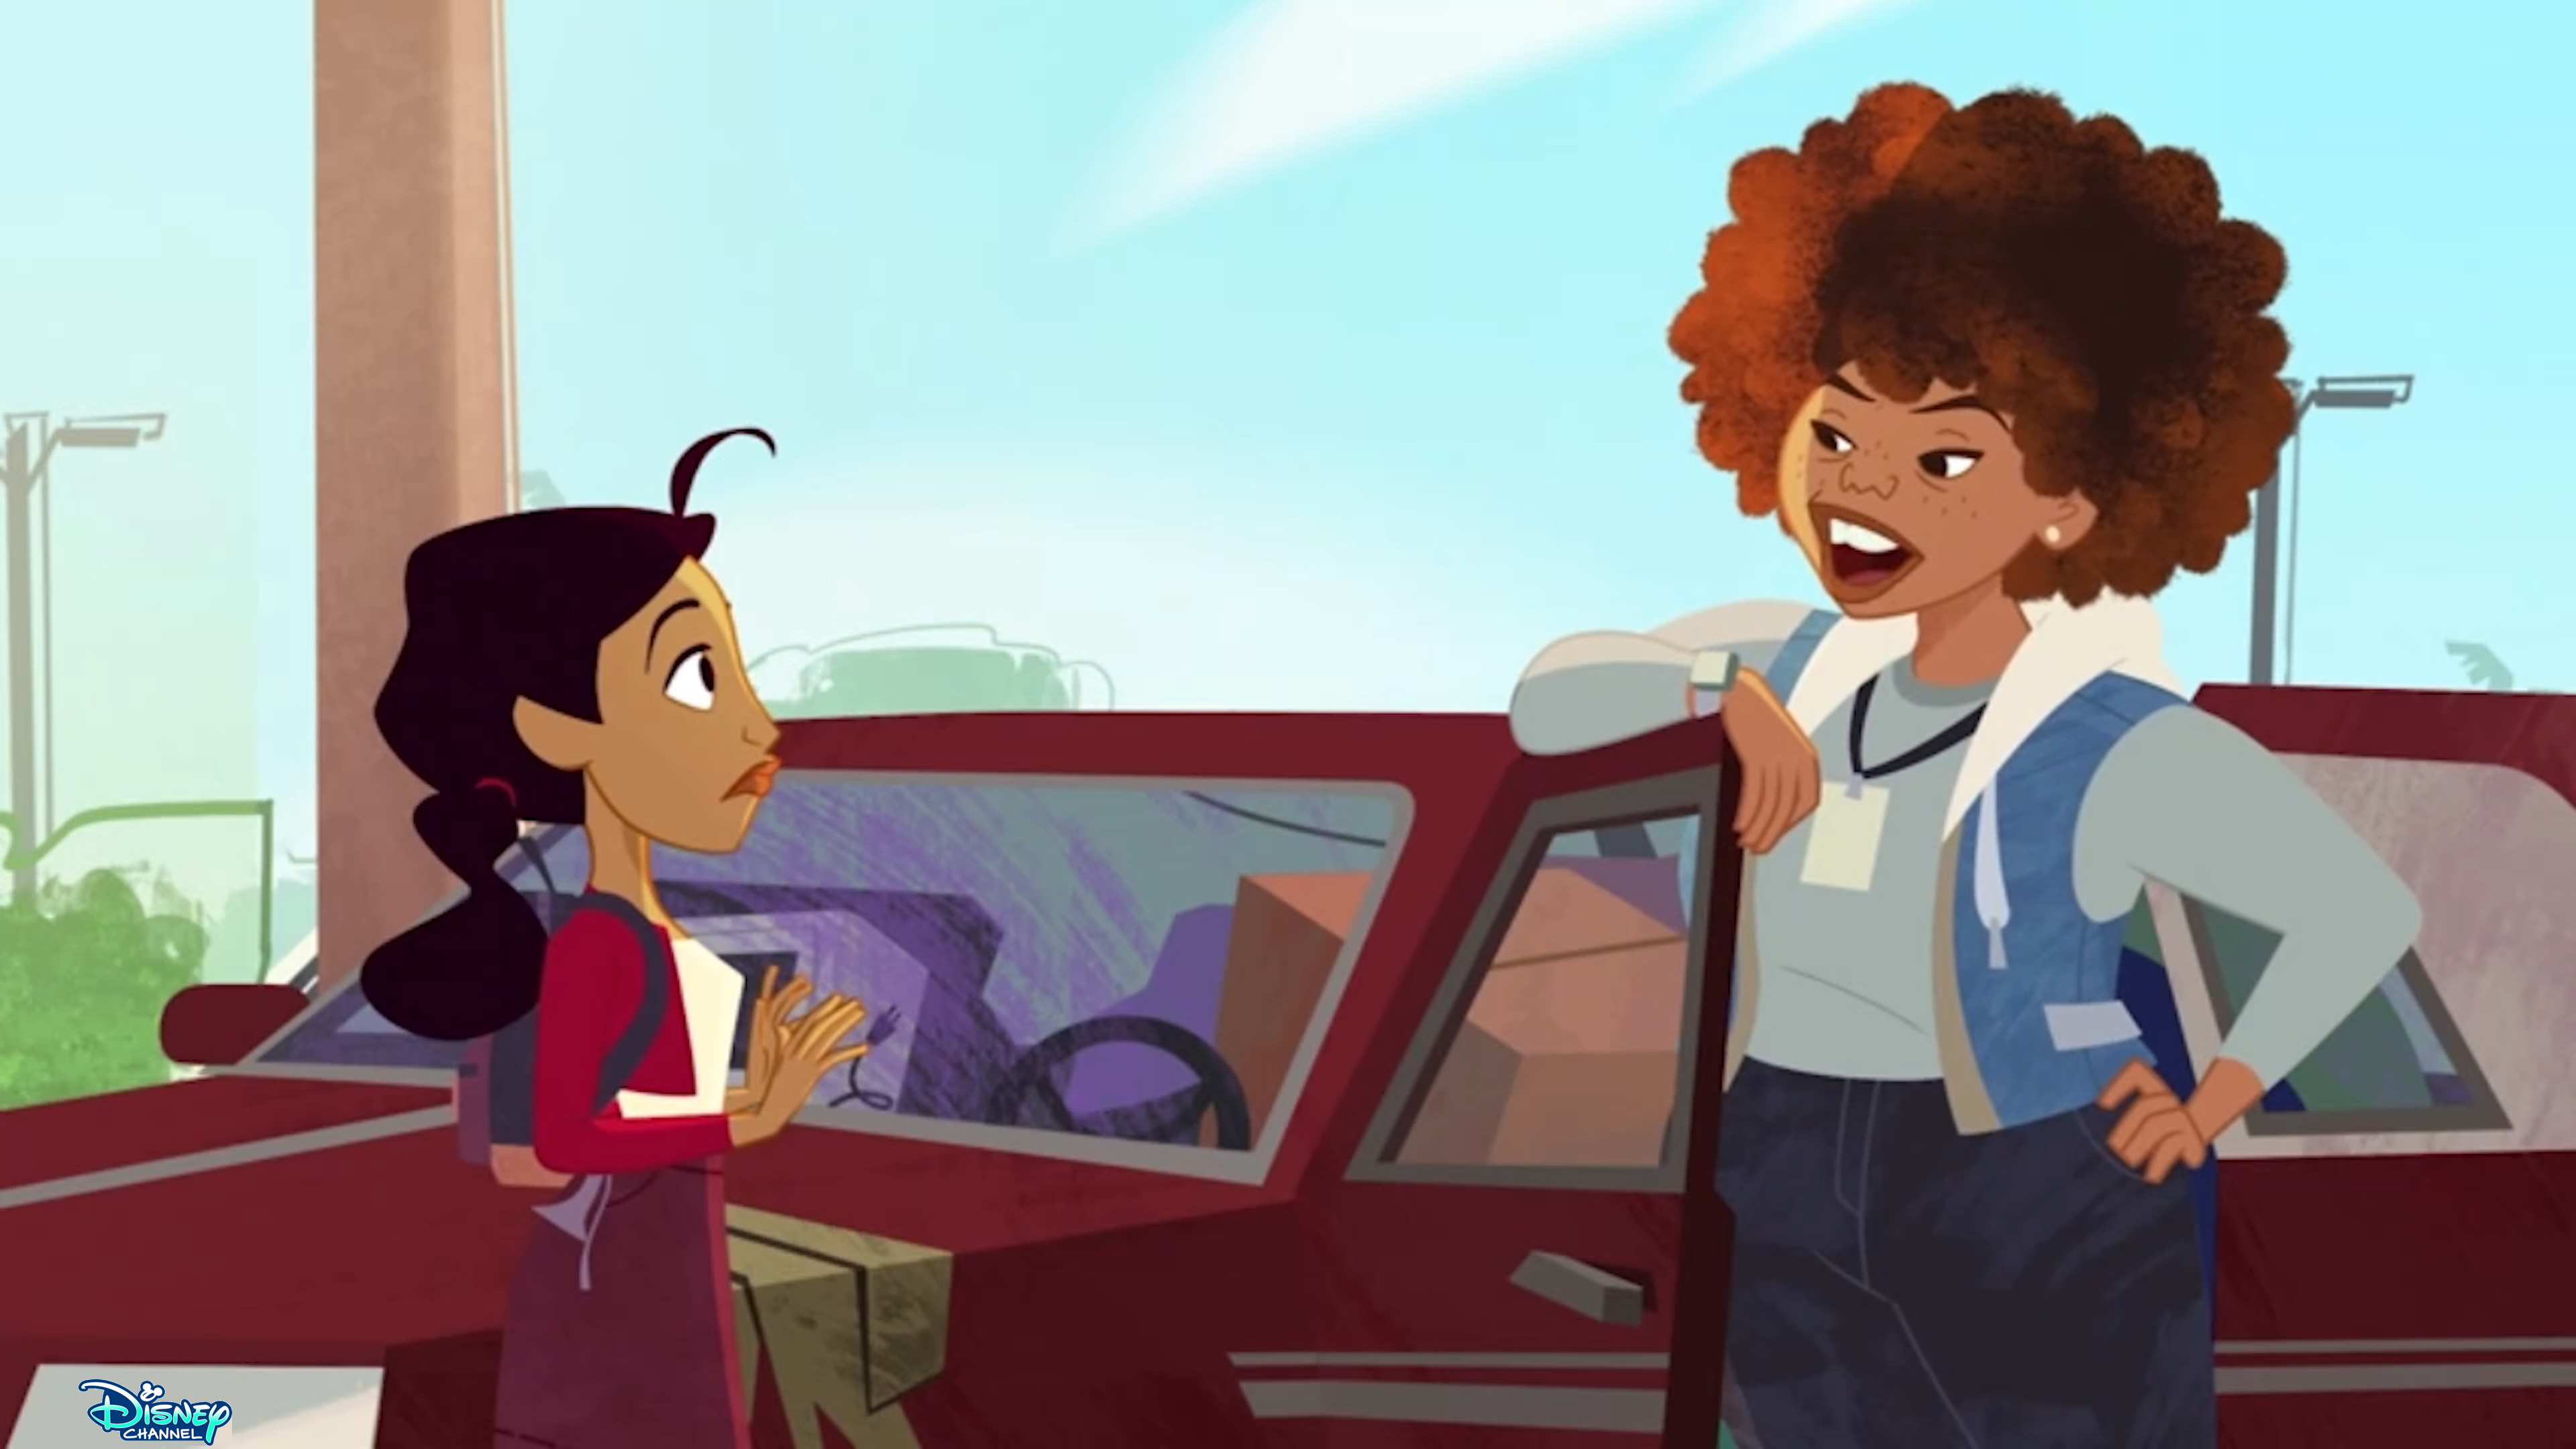  The Proud Family: Louder and Prouder - tahanan School Promo Disney Channel 1